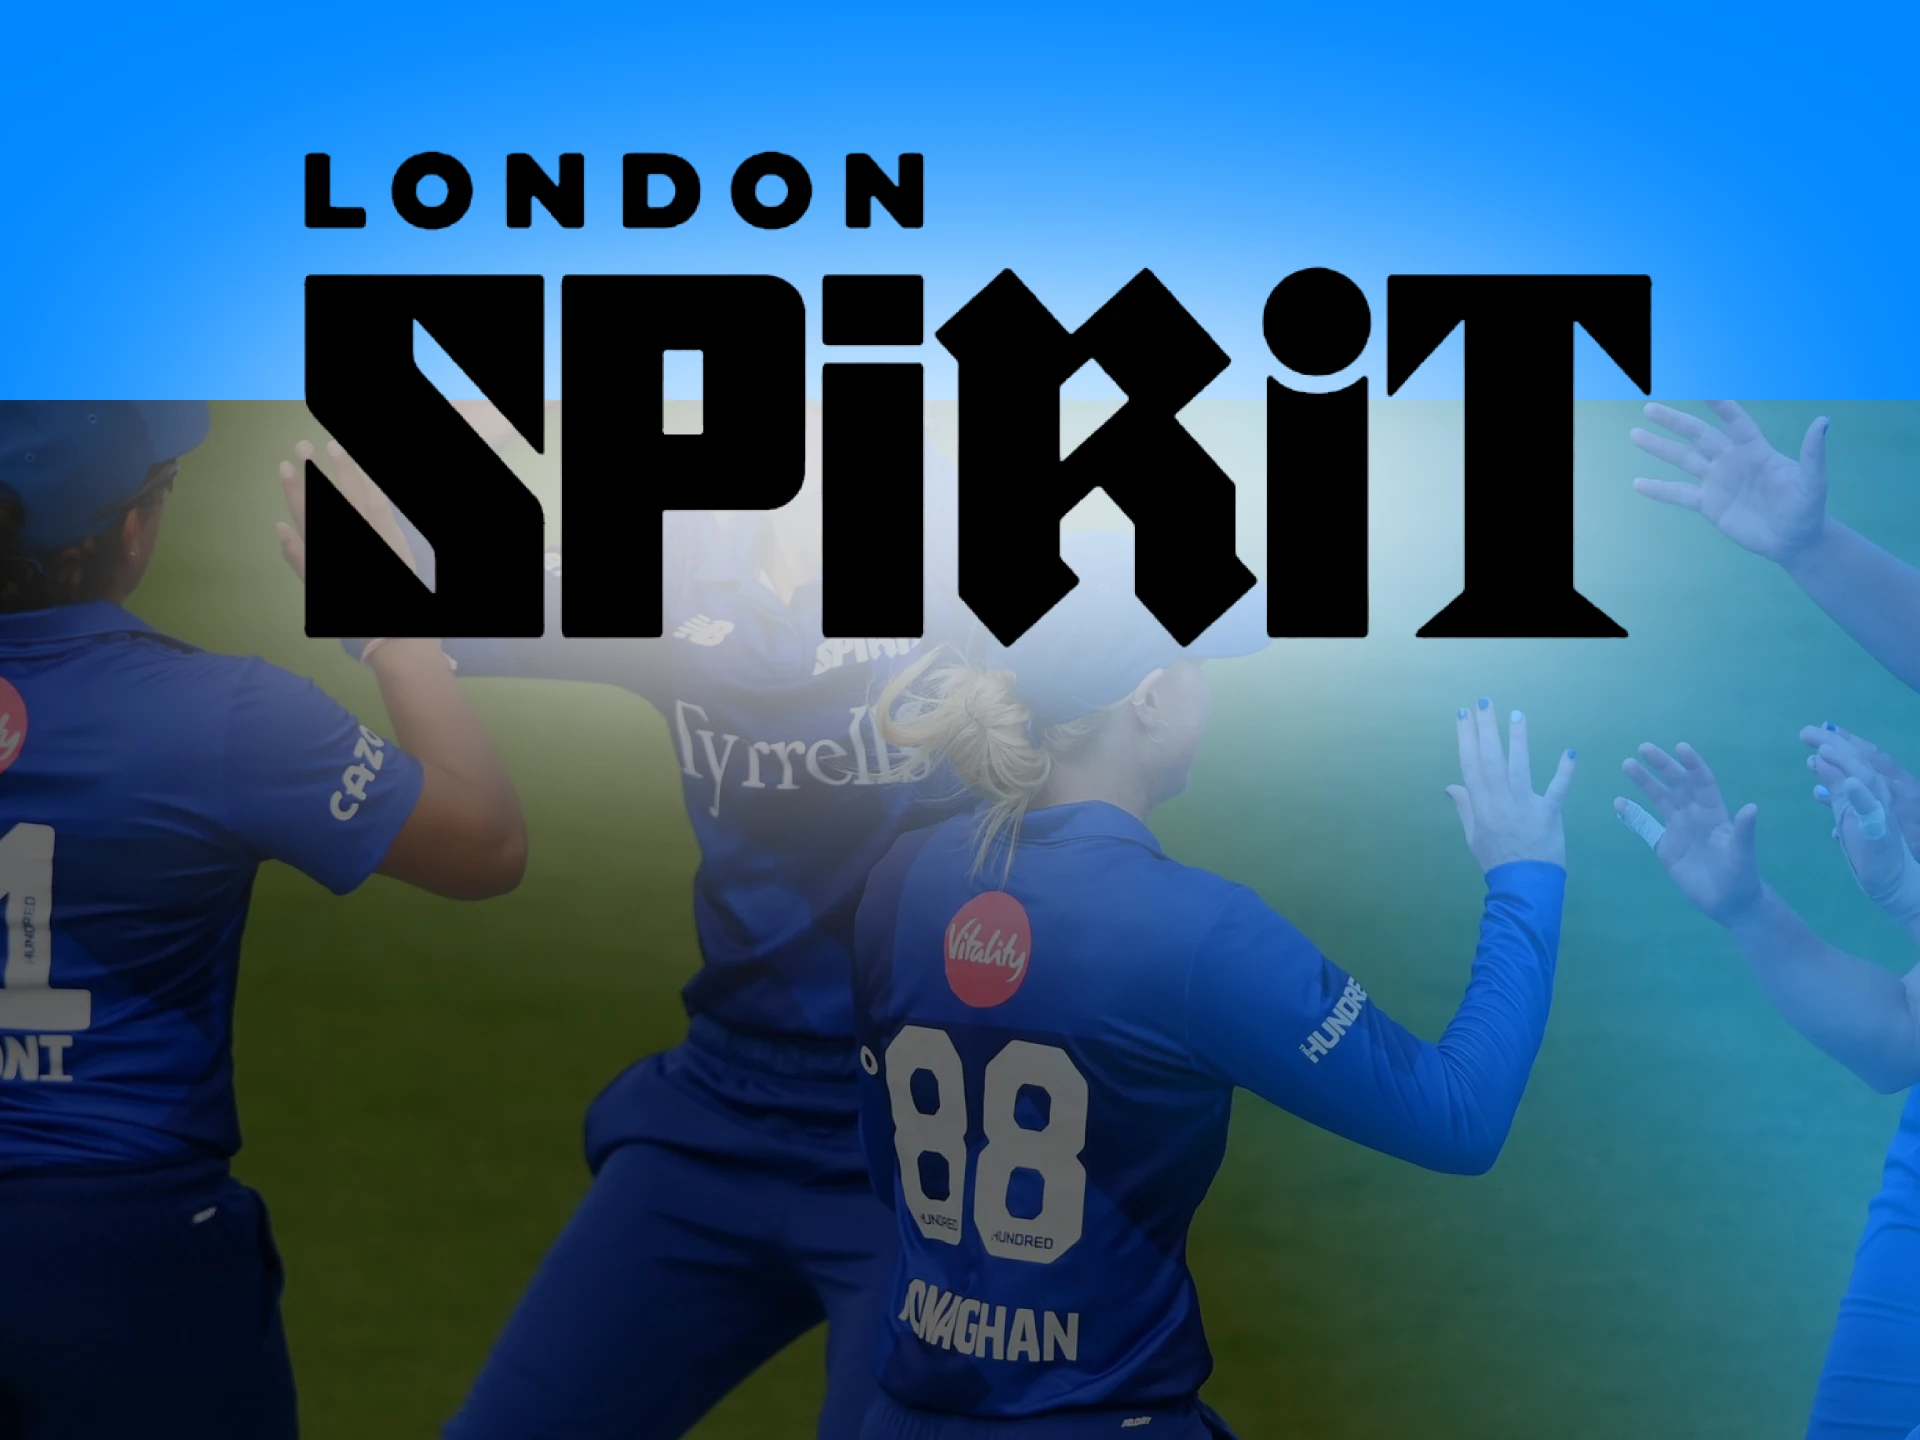 London Spirit is a great team to make bets on.